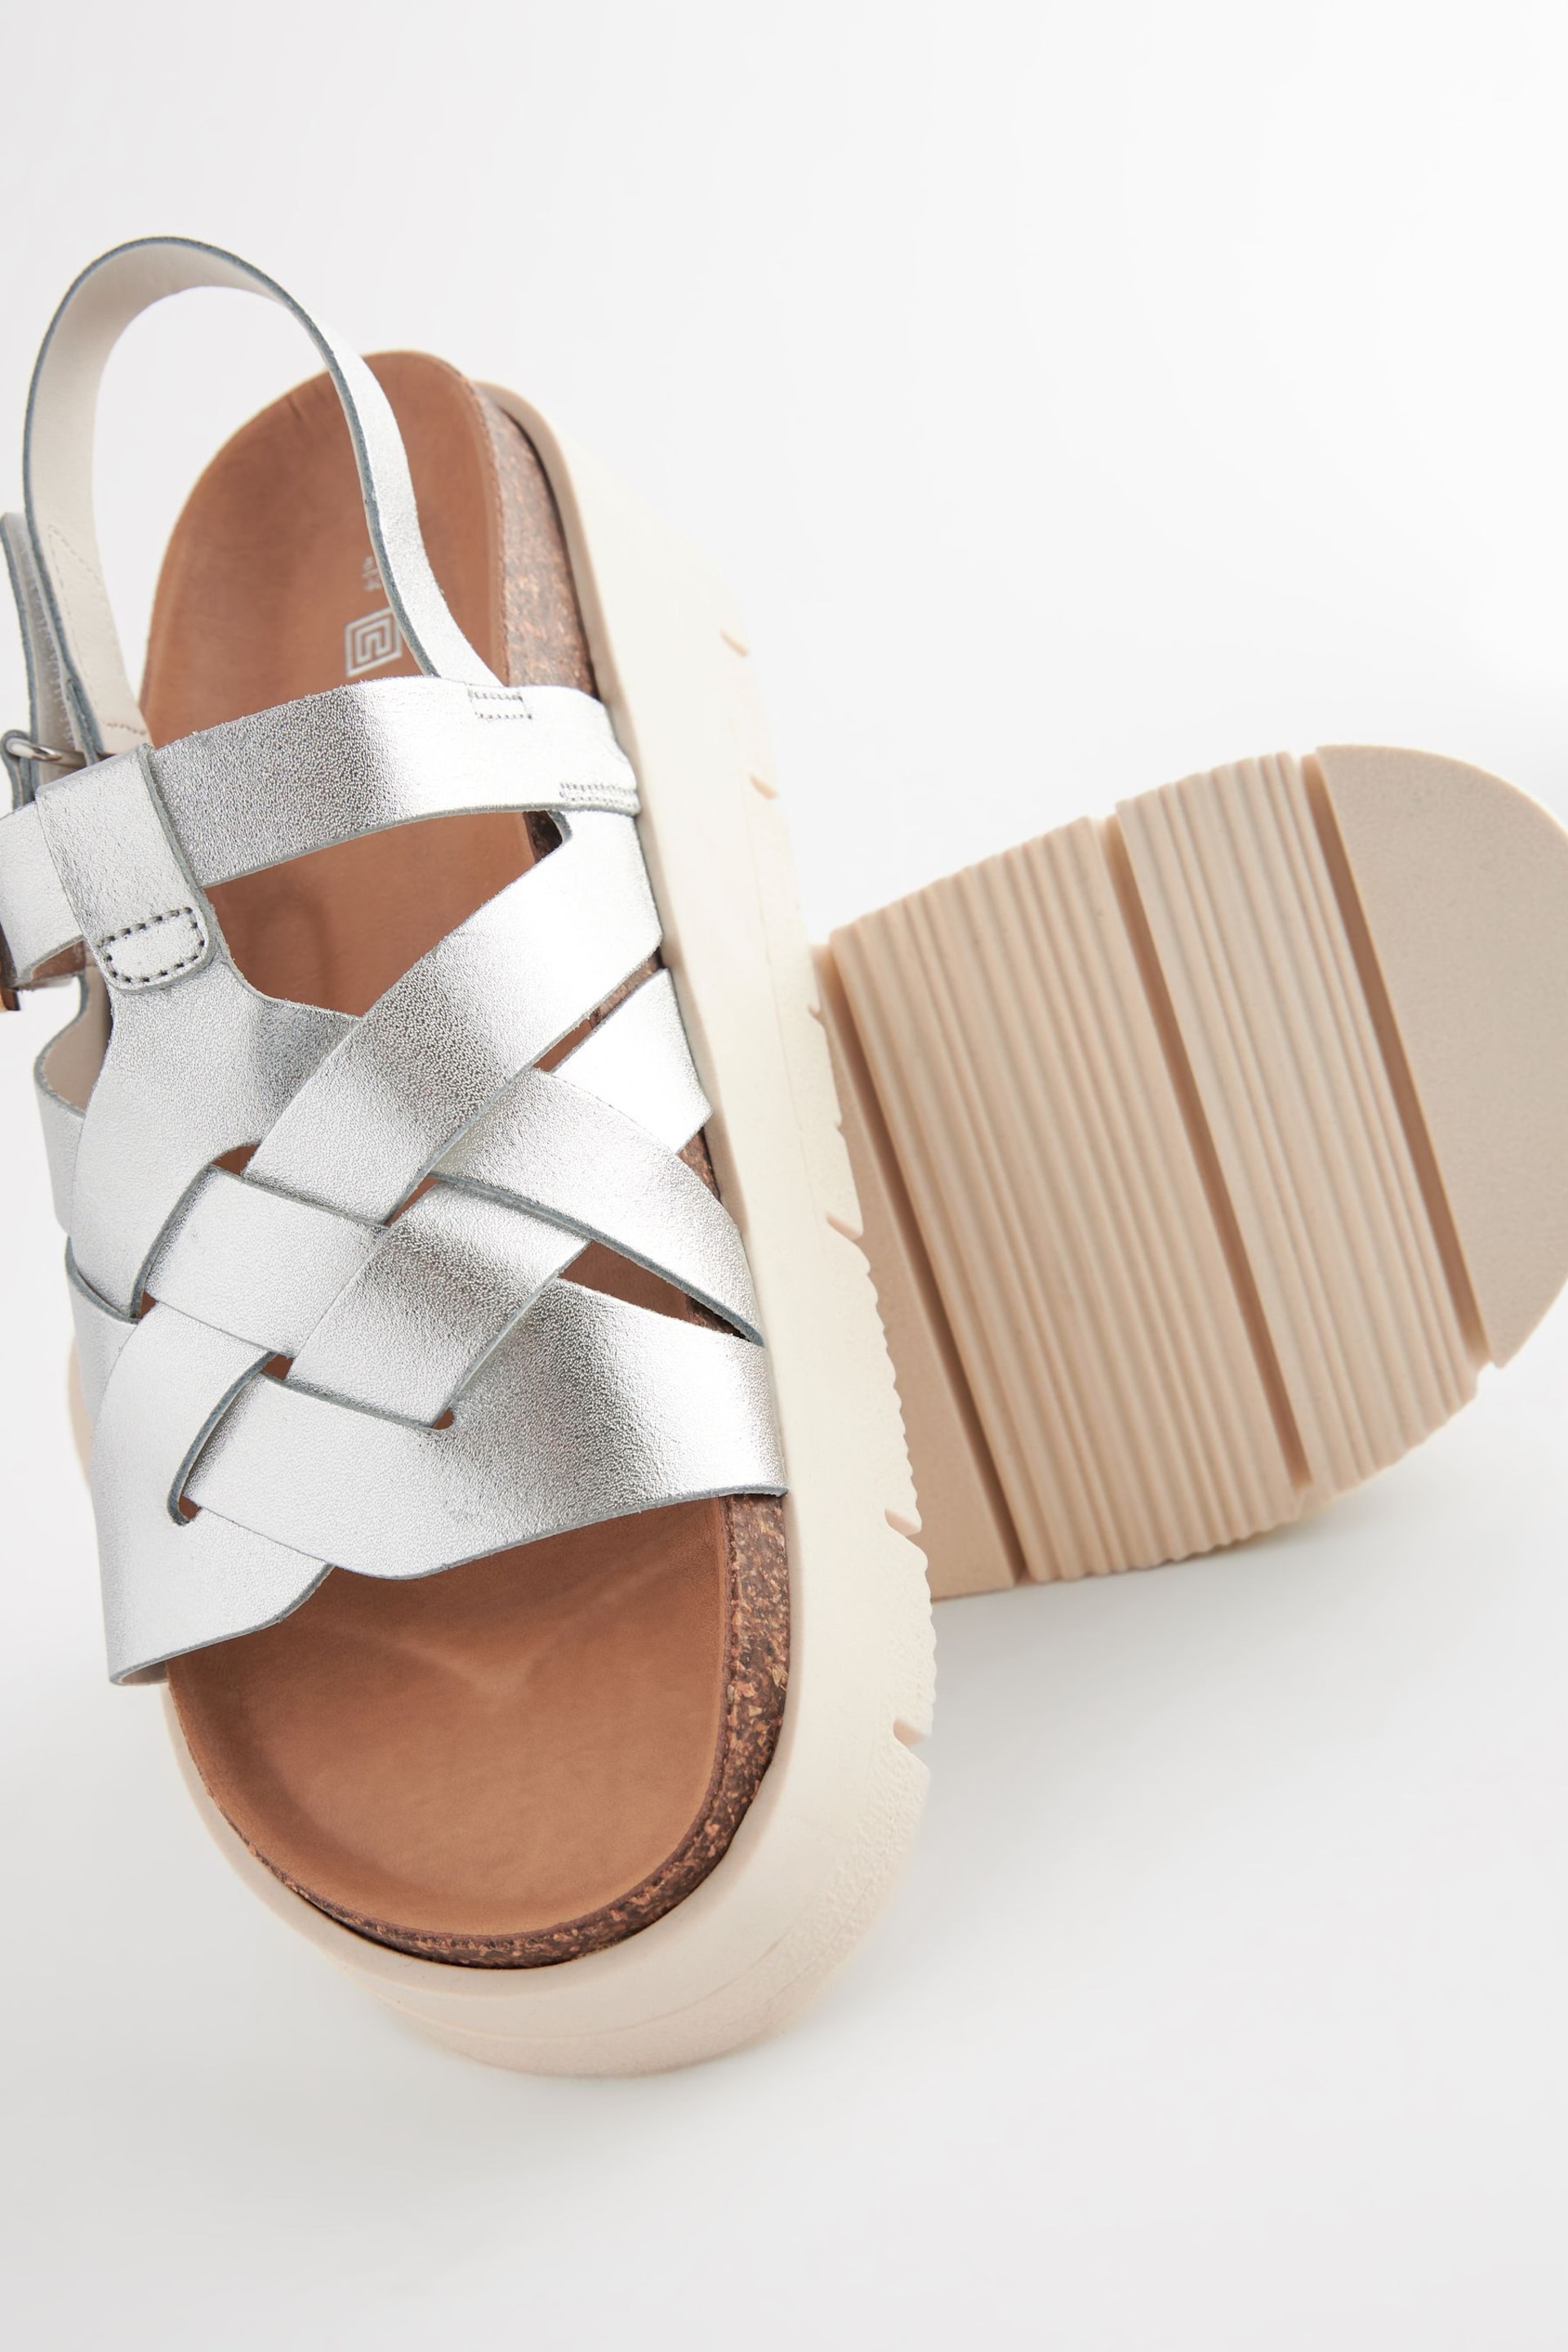 Silver Leather Weave Flatform Wedge Sandals - Image 5 of 5